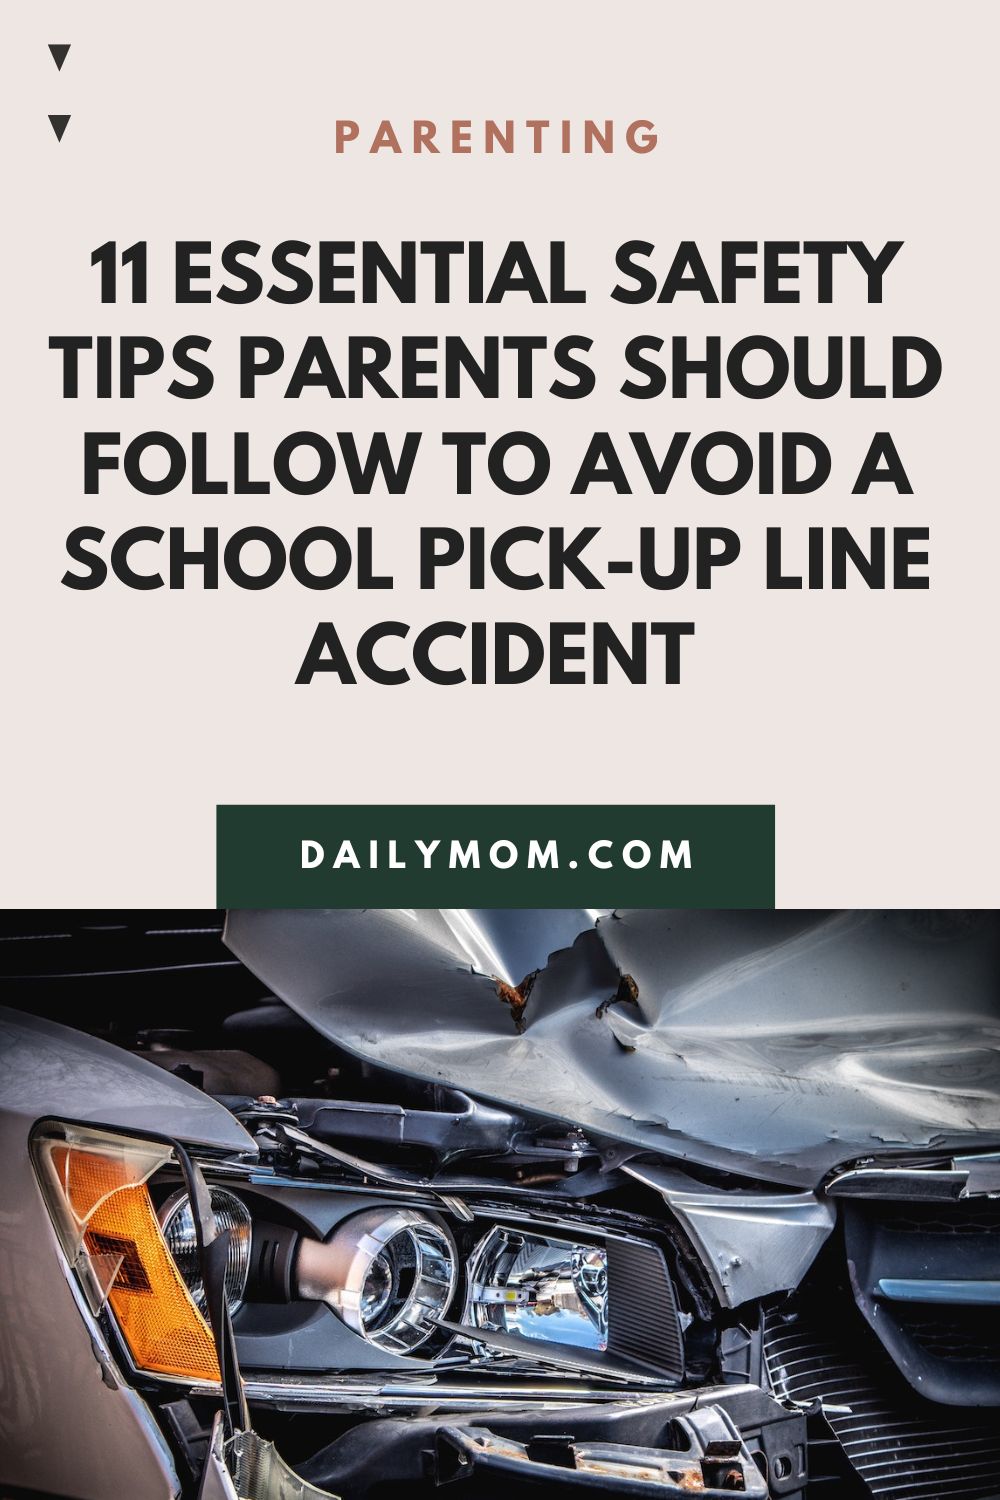 11 Essential Safety Tips Parents Should Follow To Avoid A School Car Pick-Up Line Accident